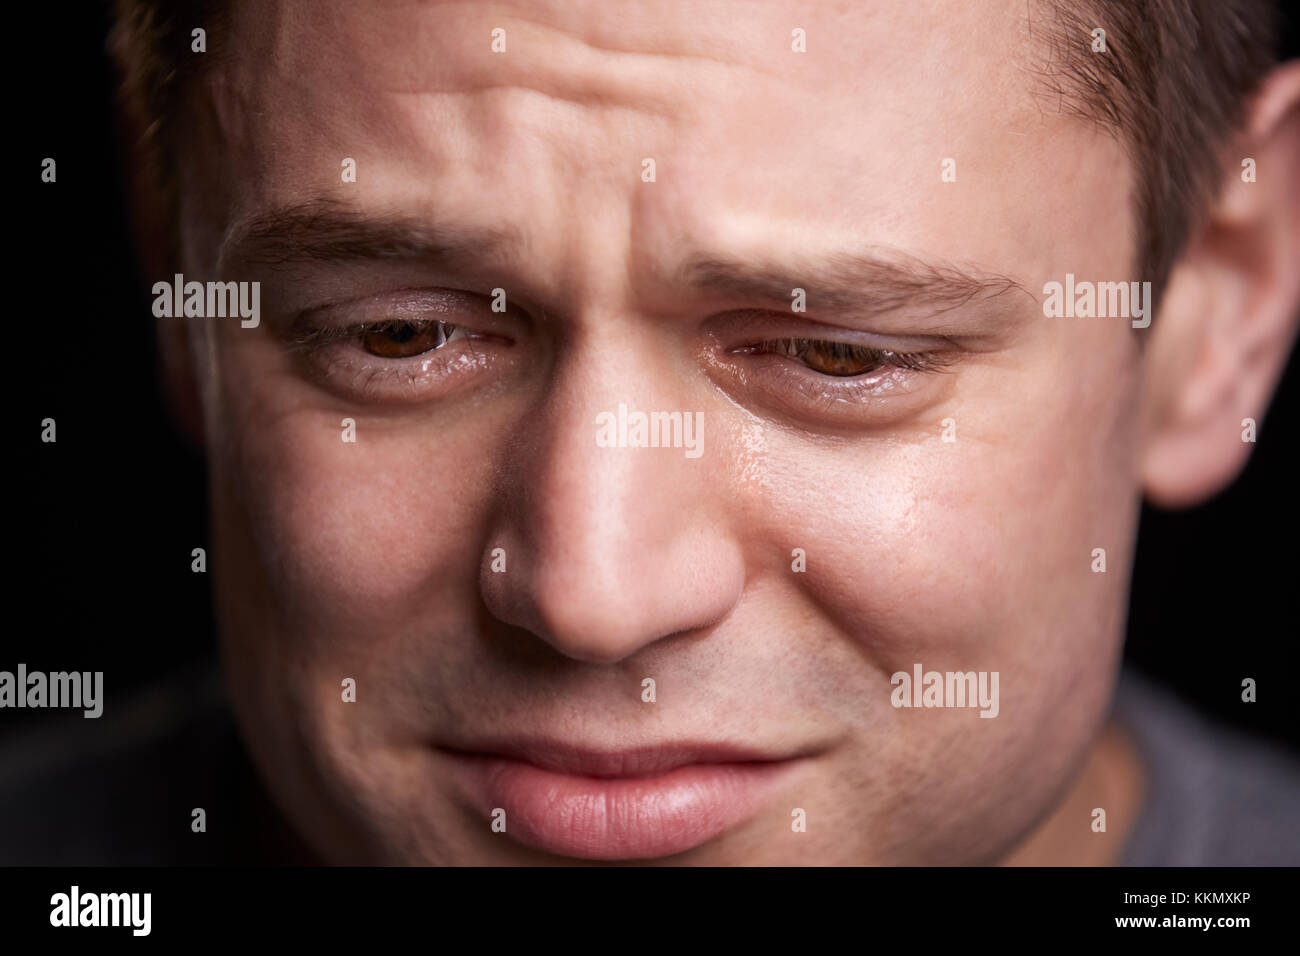 Close up portrait of crying young white man looking down Stock Photo